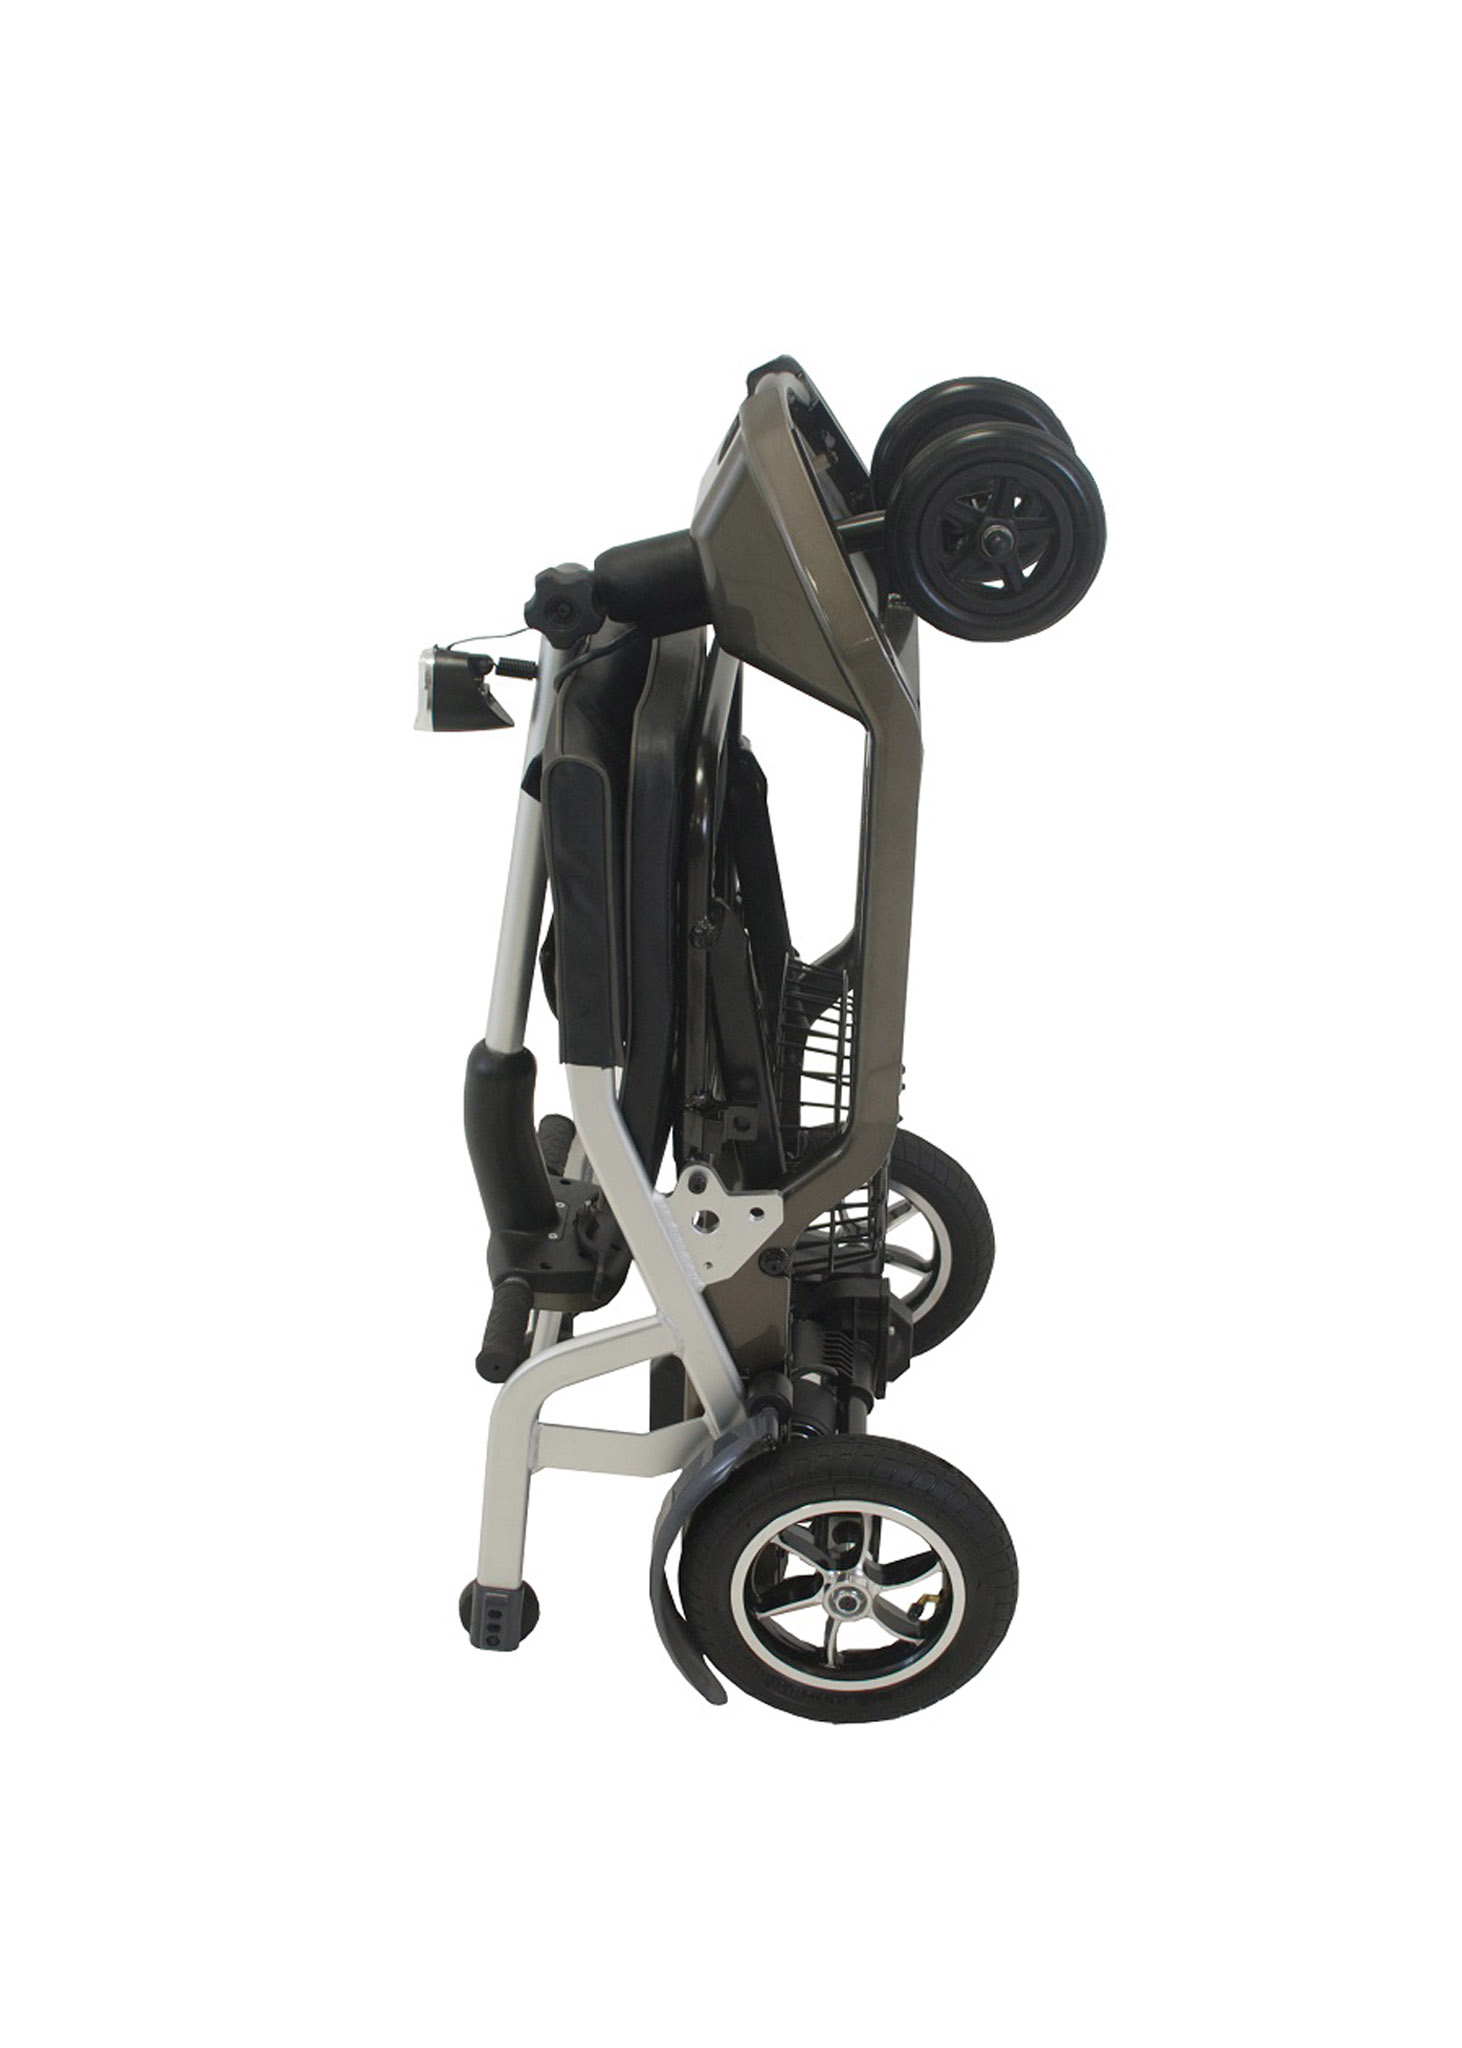 One Rehab QFold Scooter